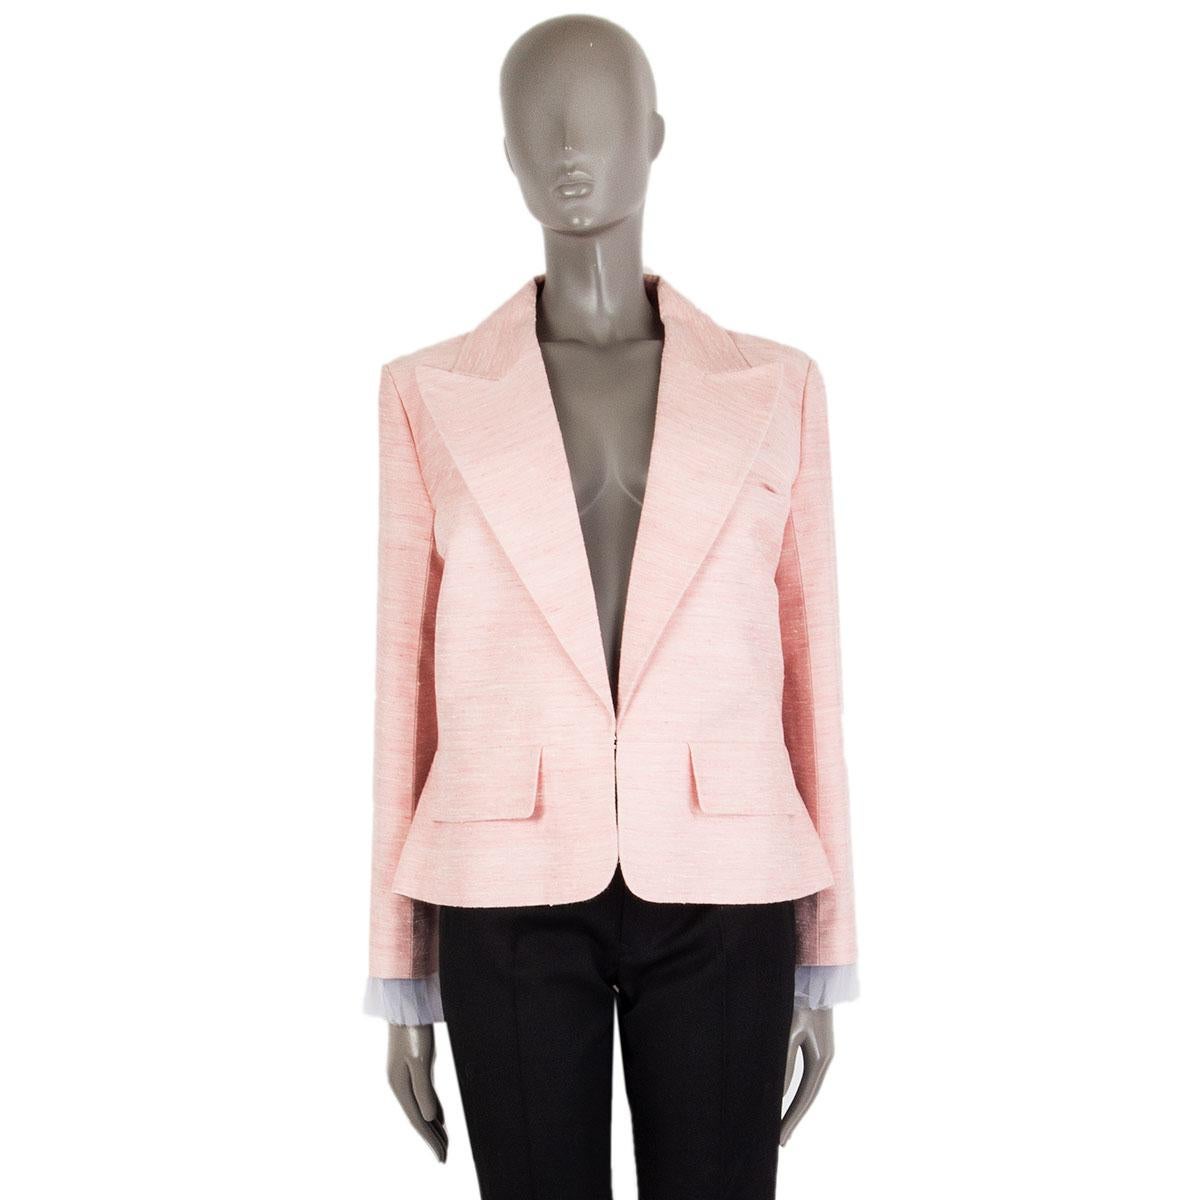 authentic Chanel 'Paris-Cuba' peak-collar blazer in baby pink silk duping (100%). With two flap pockets on the front, back slit, signature chain around the inside of the hemline, and detachable pleated cuffs in off-white polyester tulle (100%).